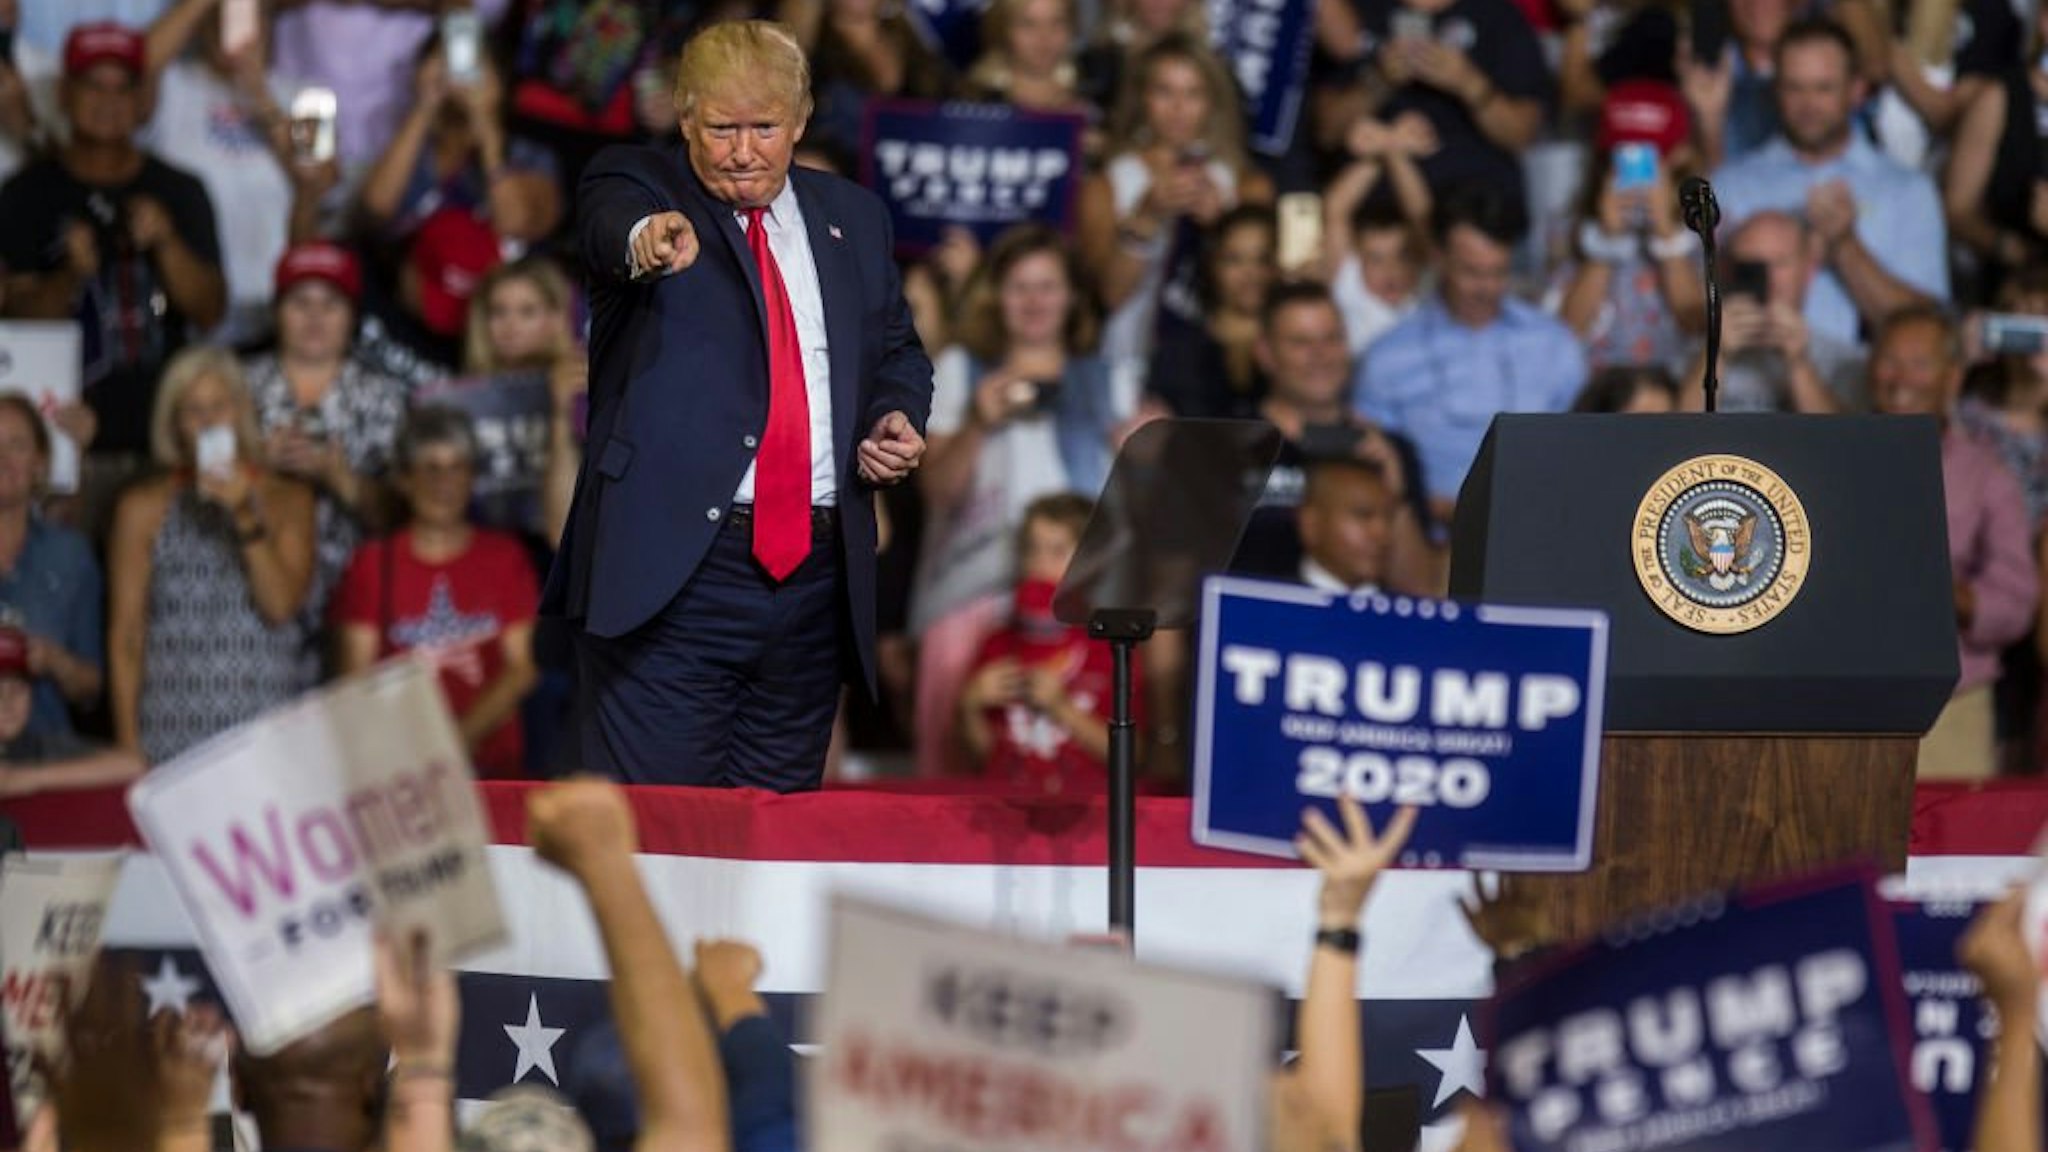 President Donald Trump speaks during a Keep America Great rally on July 17, 2019 in Greenville, North Carolina.